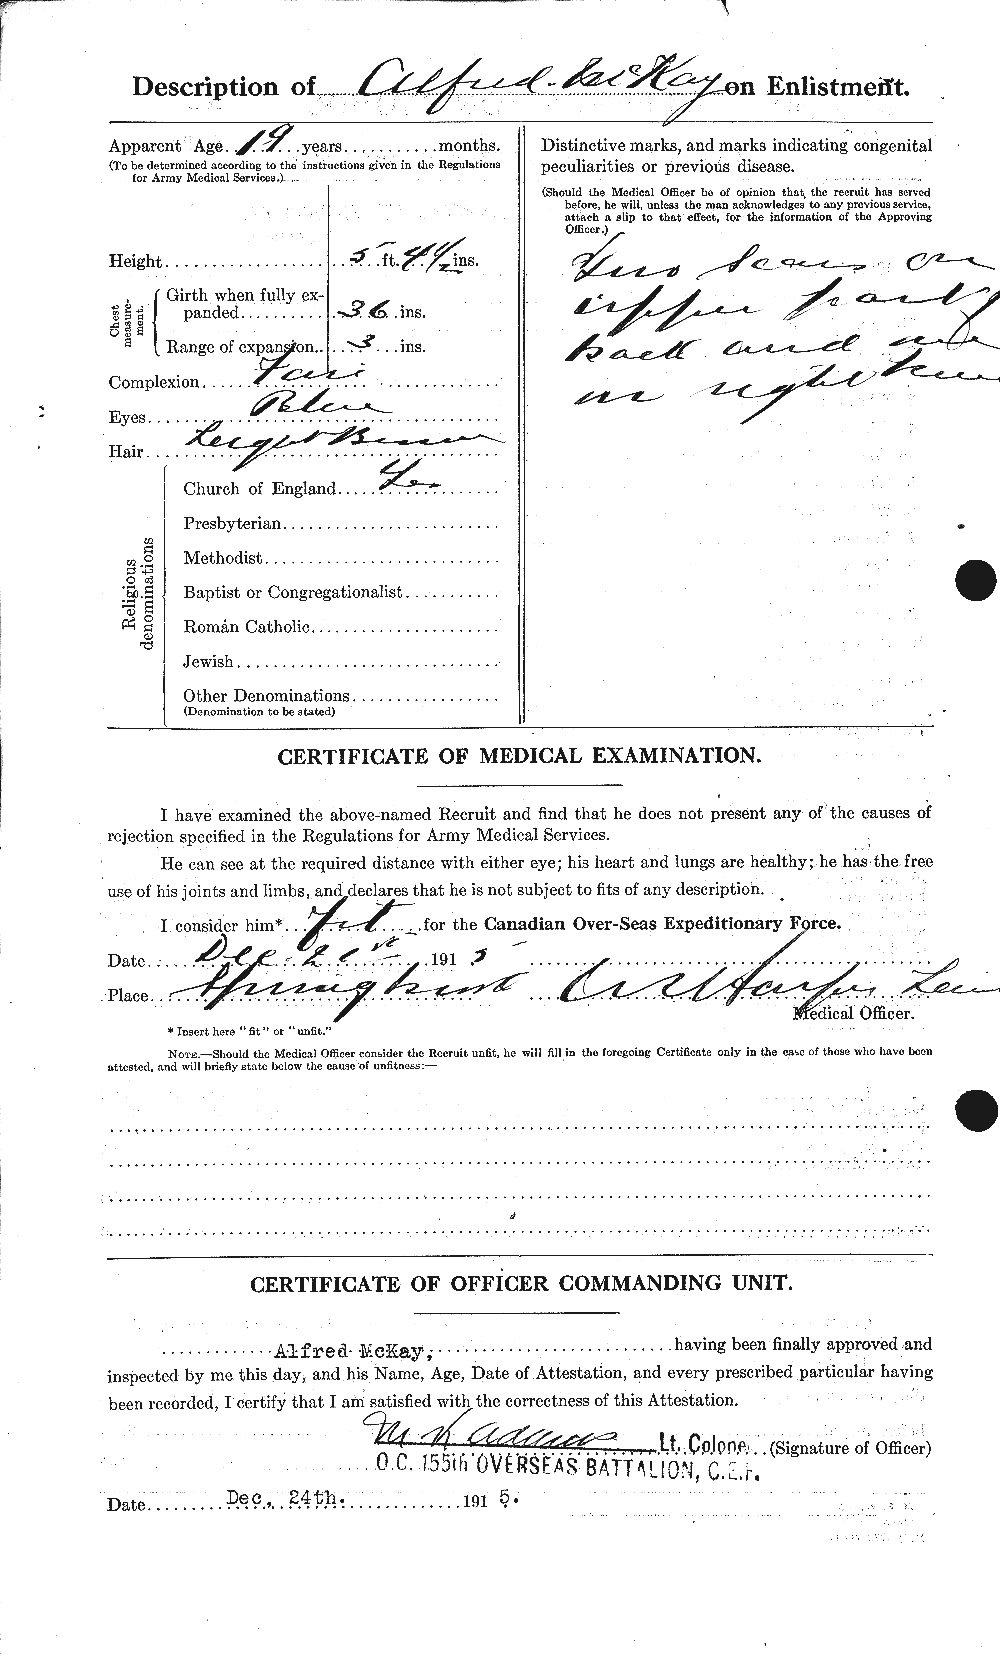 Personnel Records of the First World War - CEF 530956b